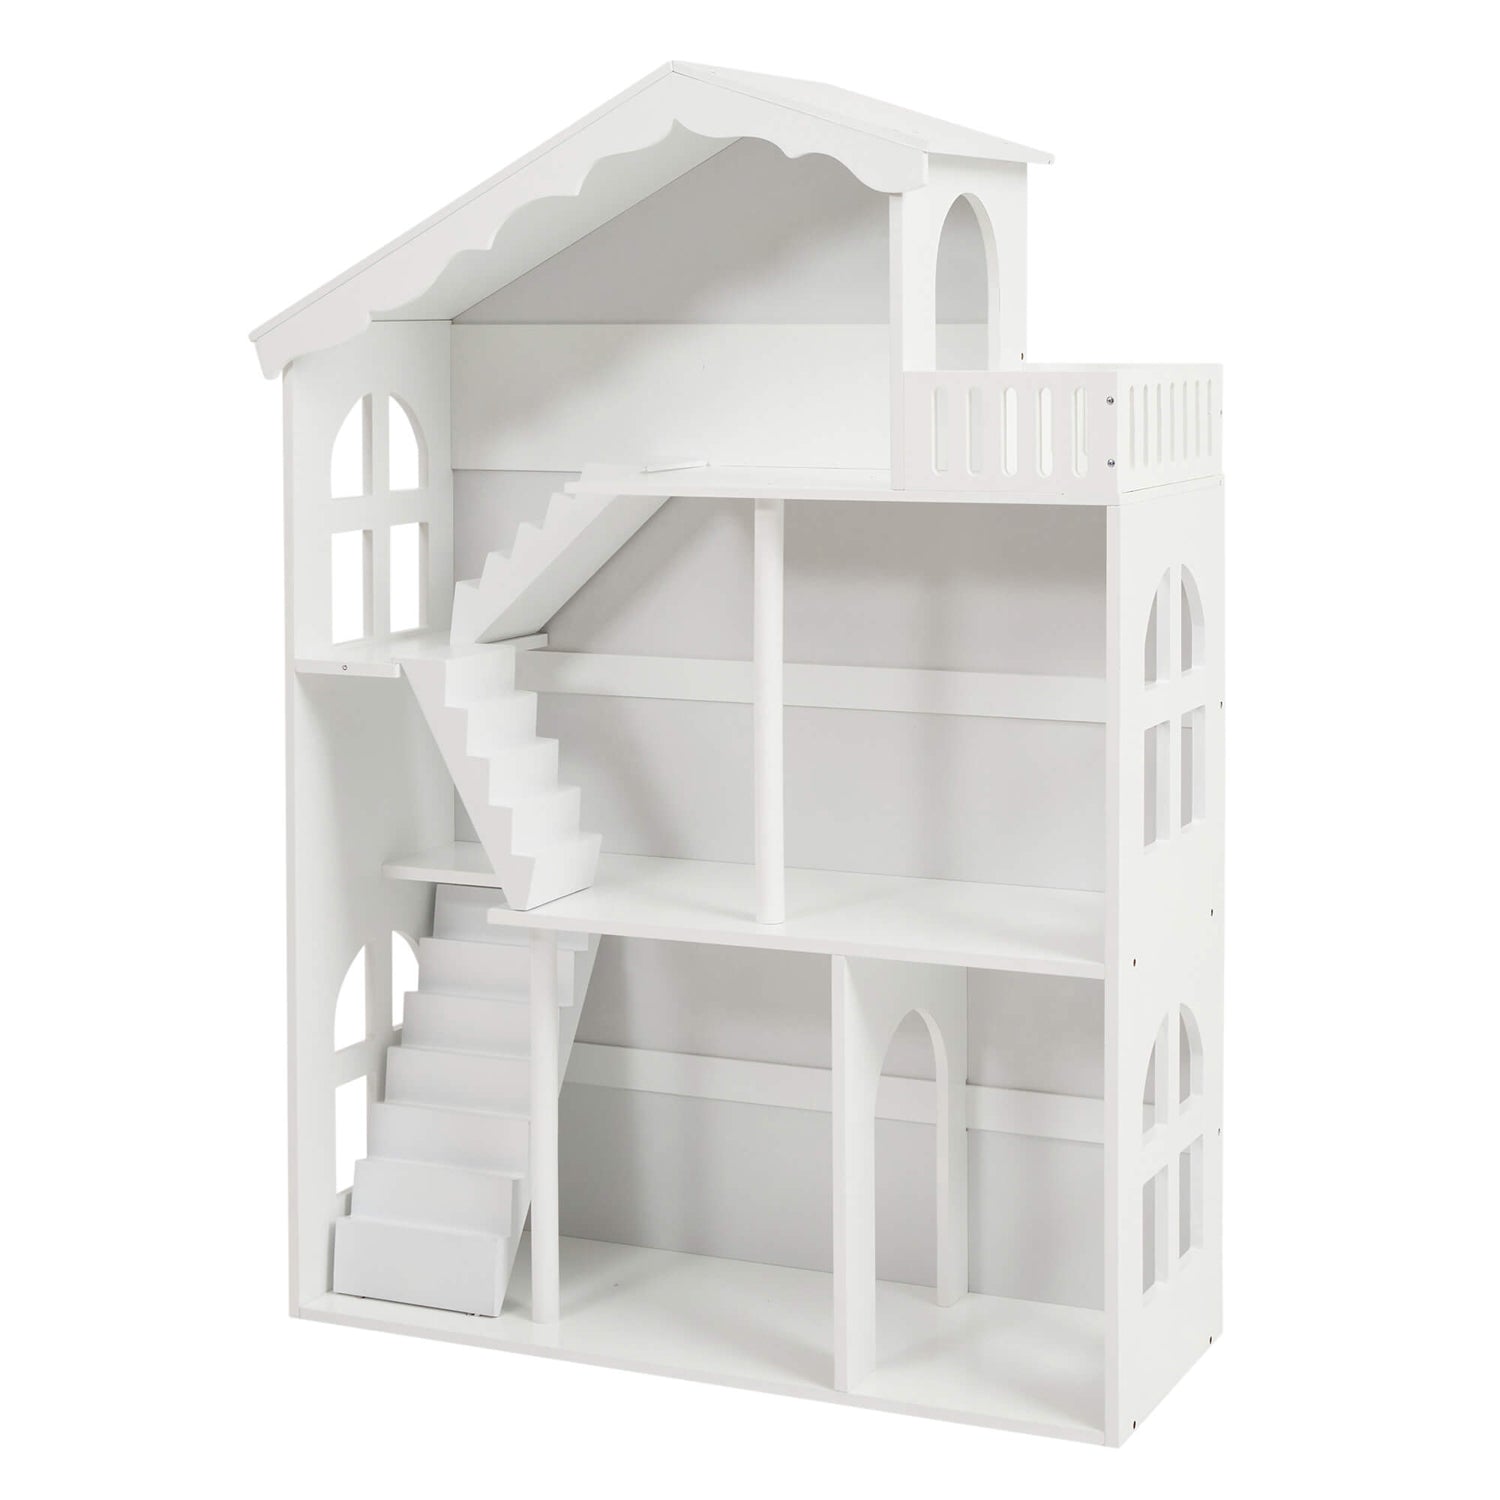 Wooden Dolls House Bookcase White by Liberty House Toys